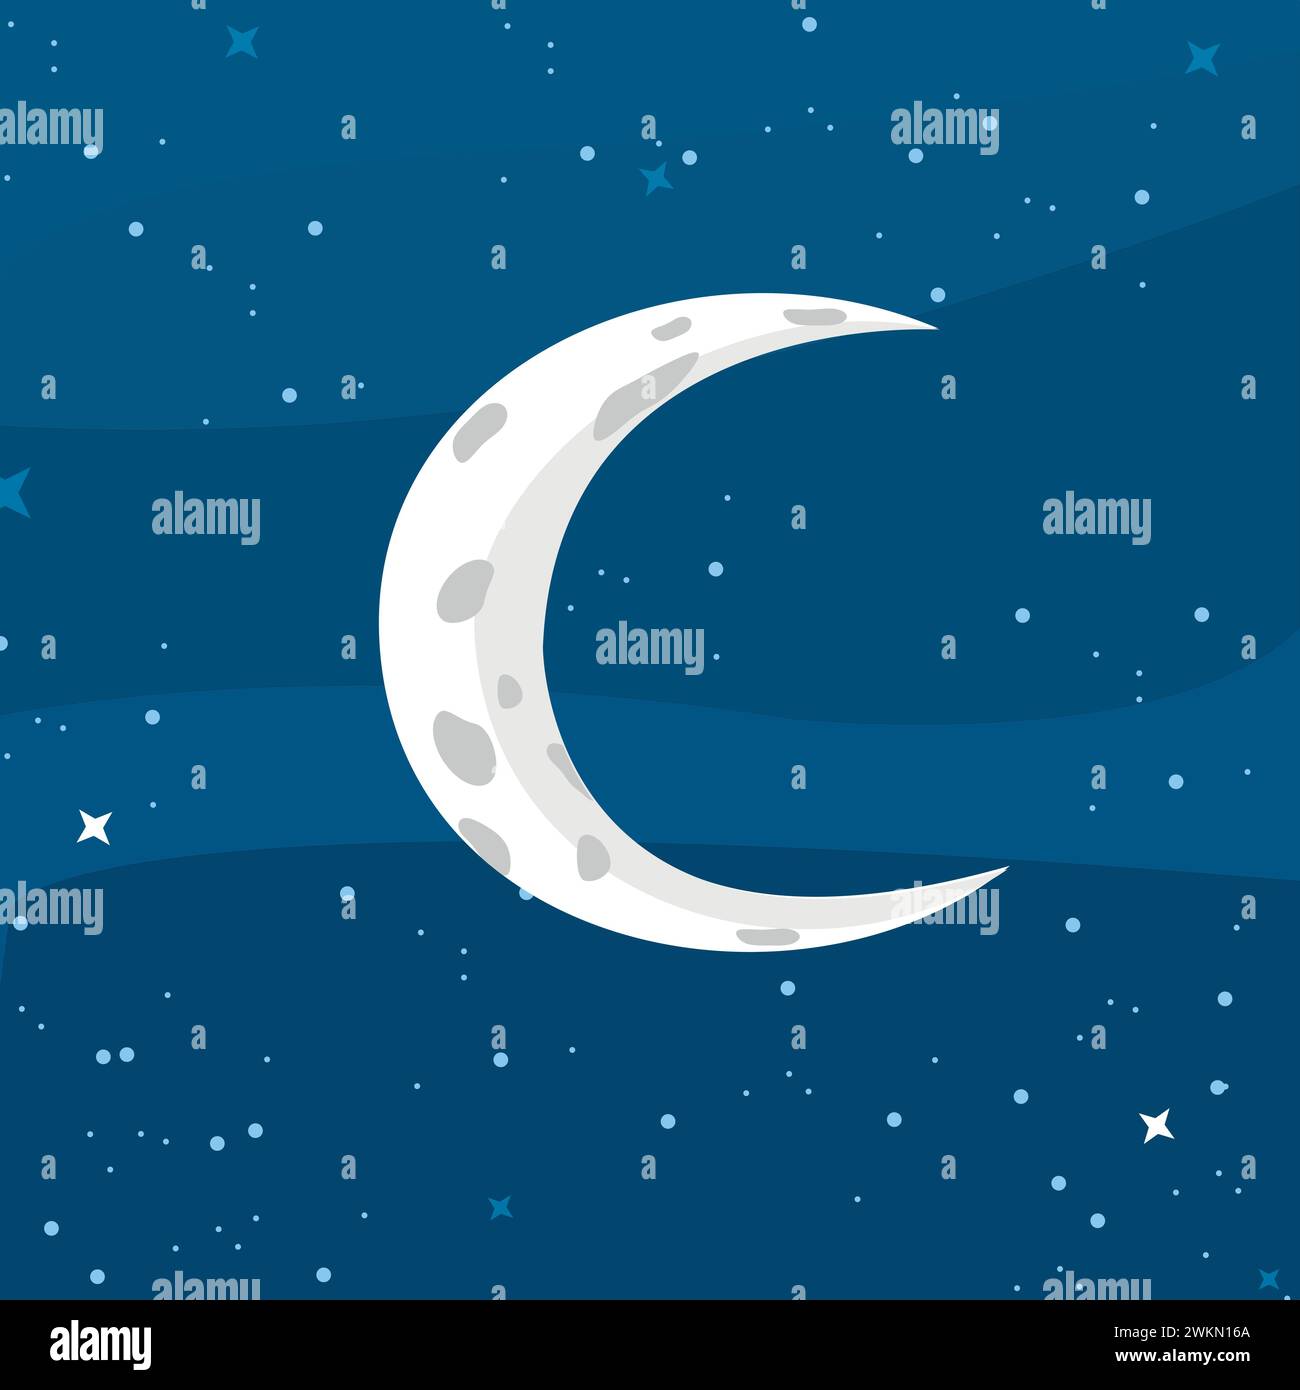 C-shaped moon, in a sky with stars Stock Vector